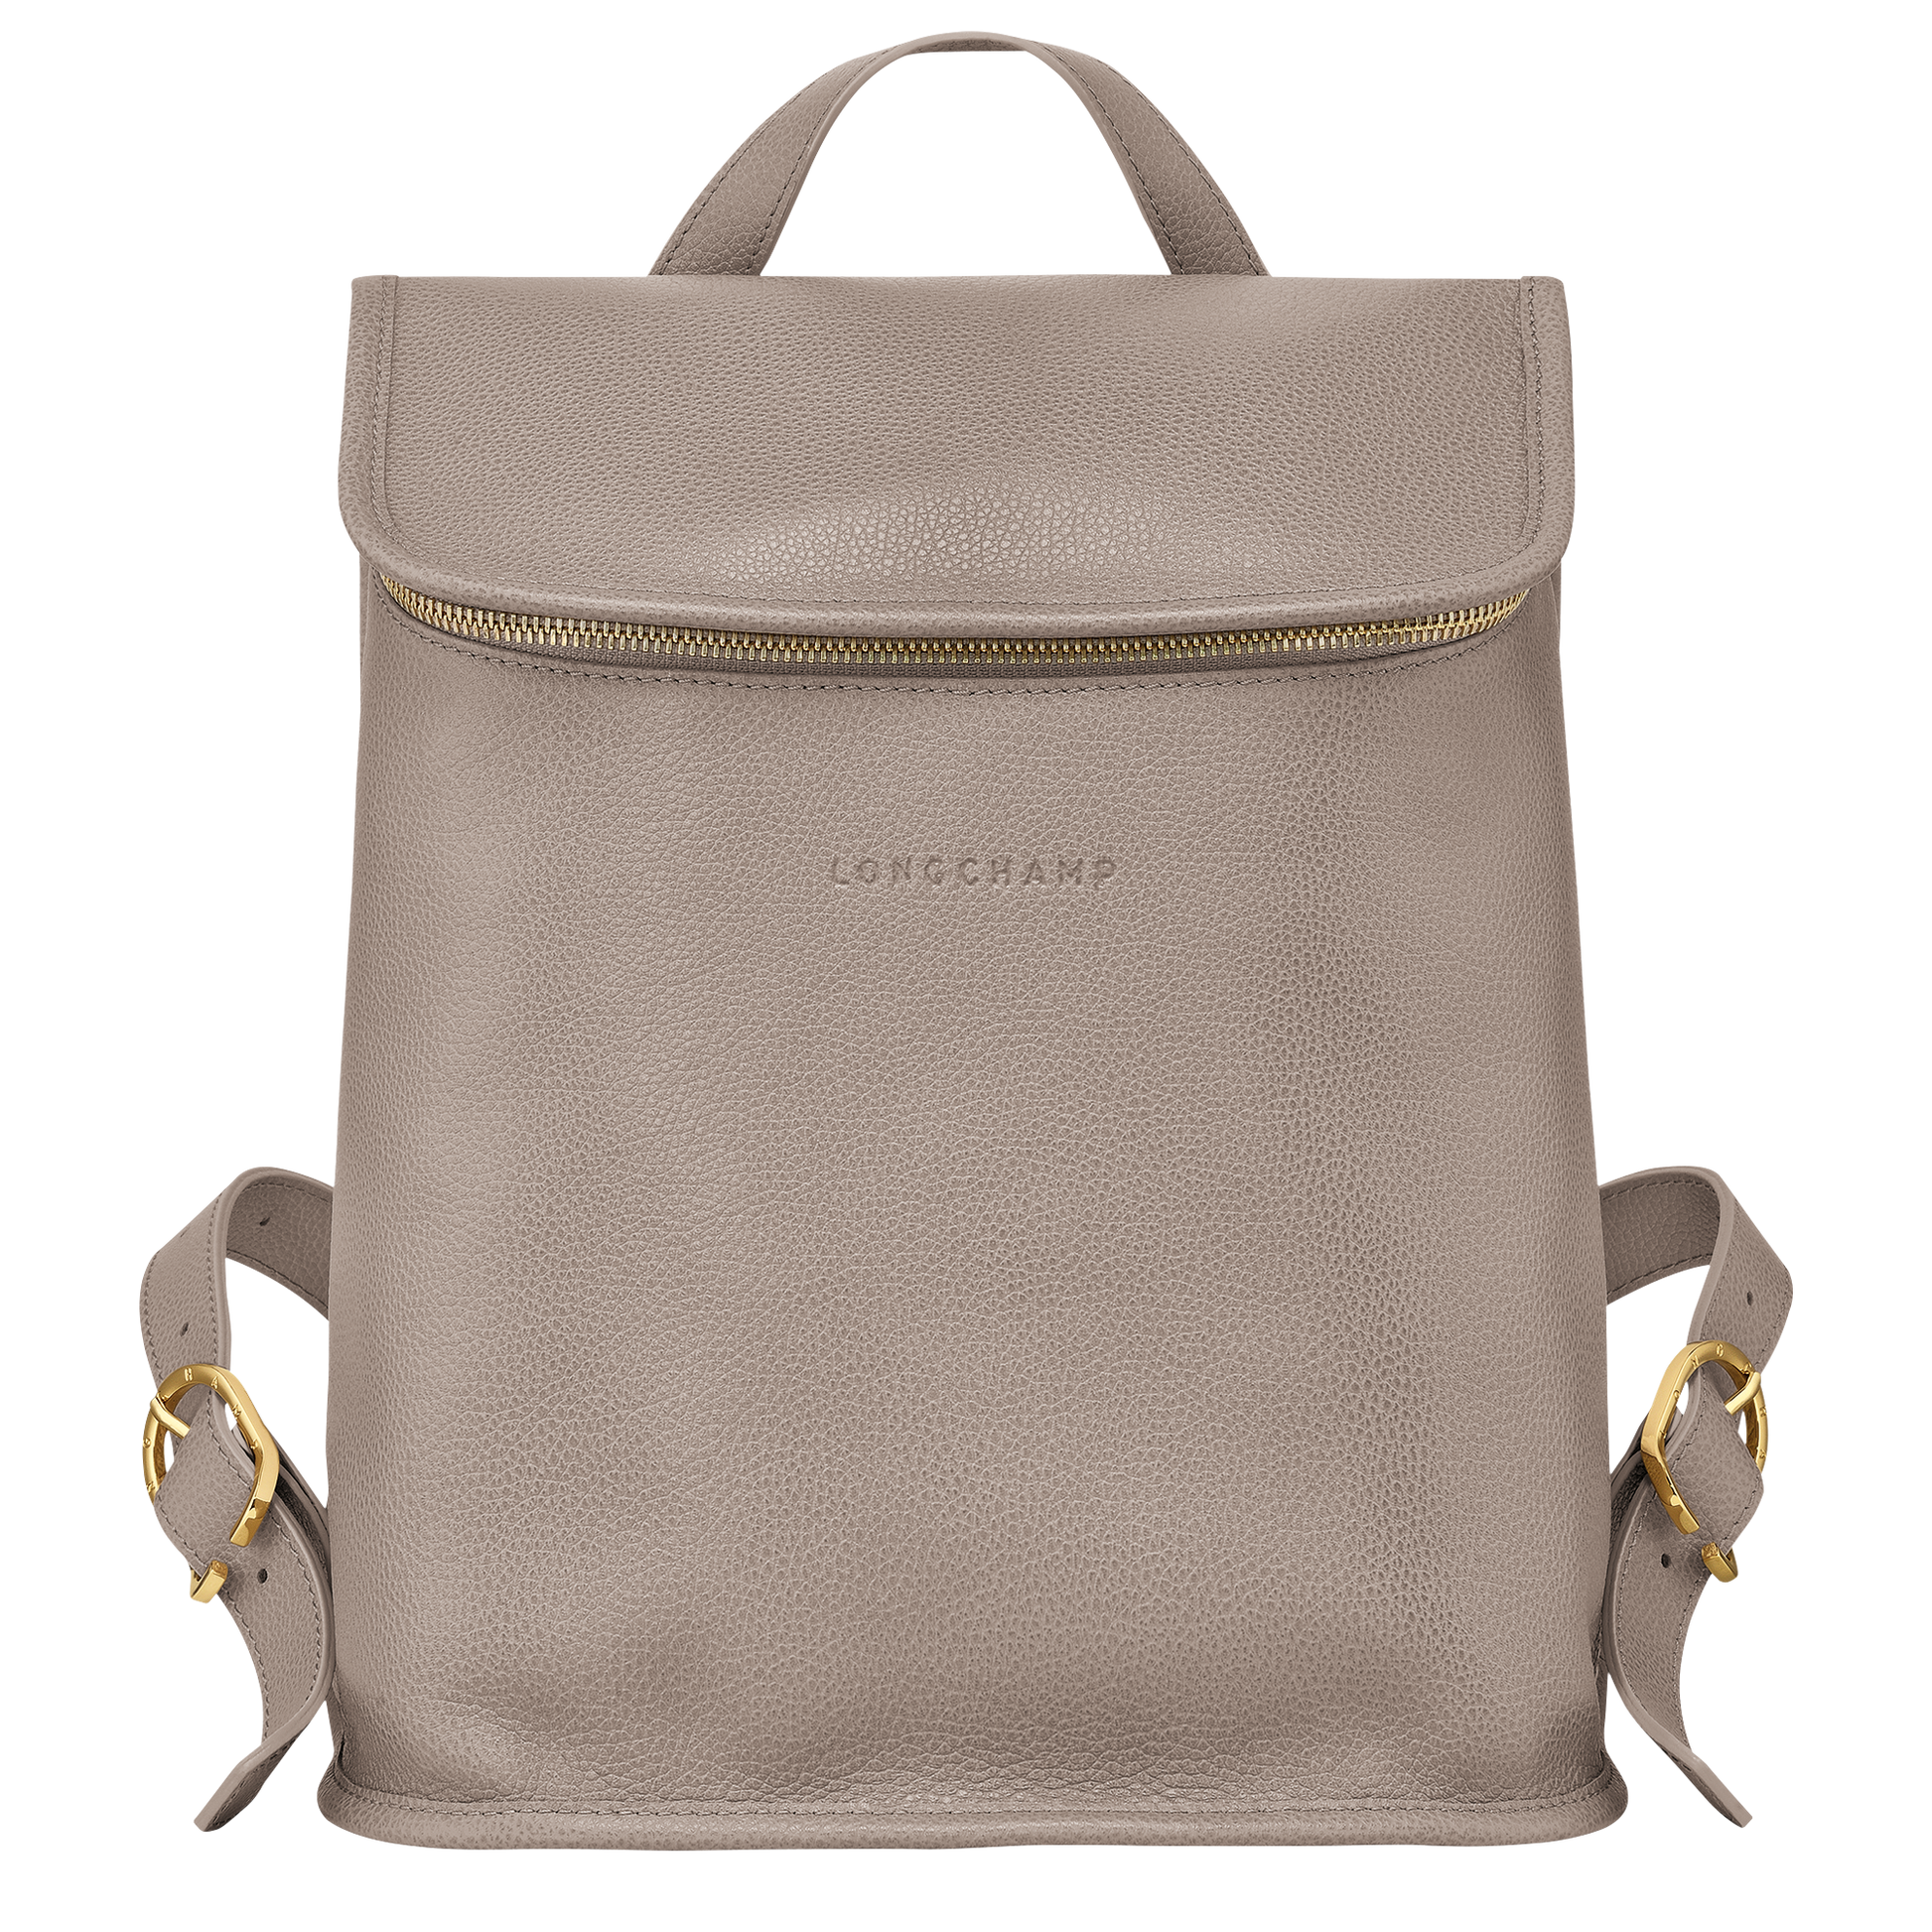 Longchamp LE FOULONNÉ - Backpack in Turtledove - 1 (SKU: 10195021P55)